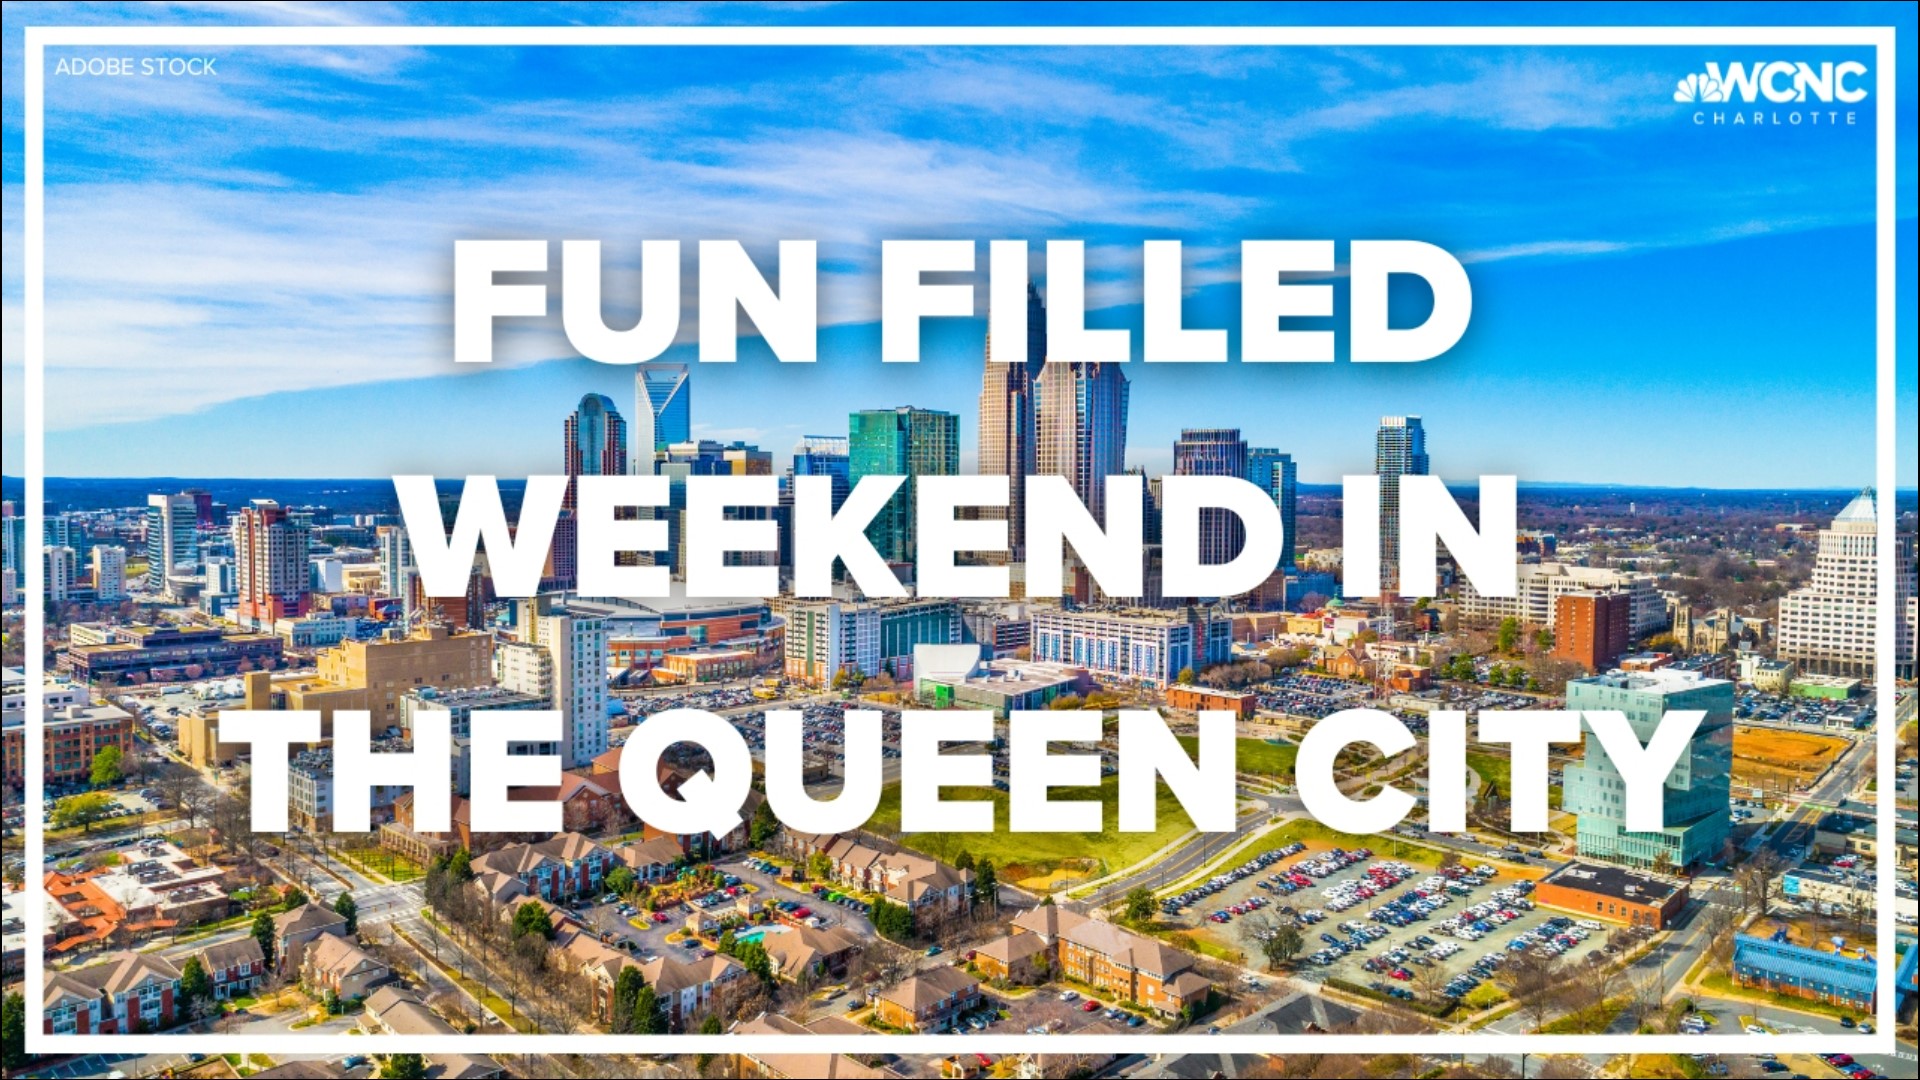 Uptown was packed this weekend with people attending fun events around the city.